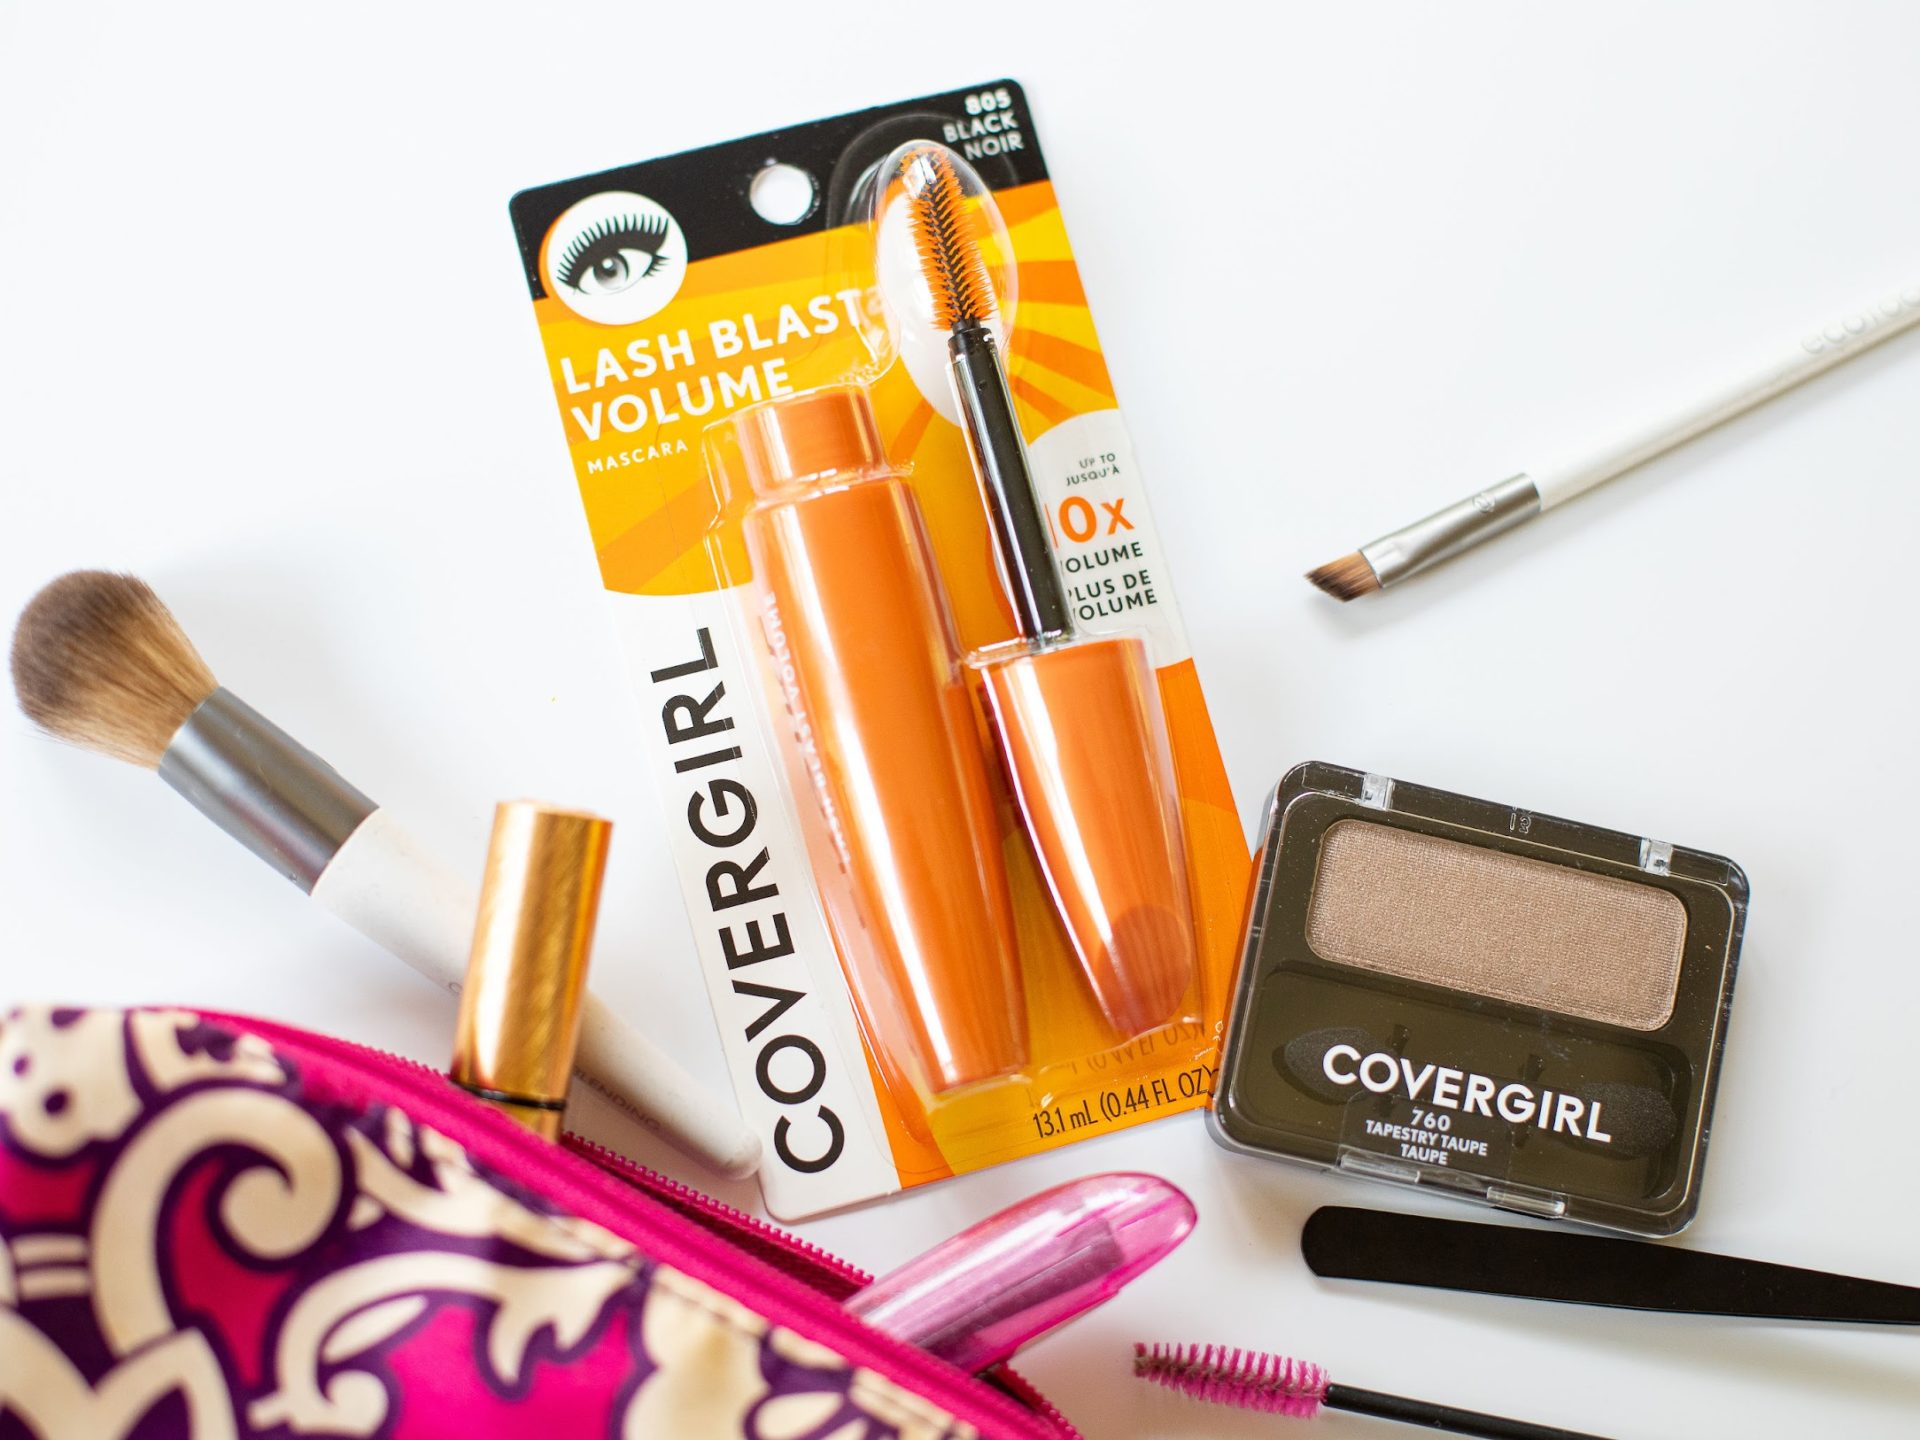 Get Covergirl Cosmetics For As Low As $1.83 (Regular Price $6.49)